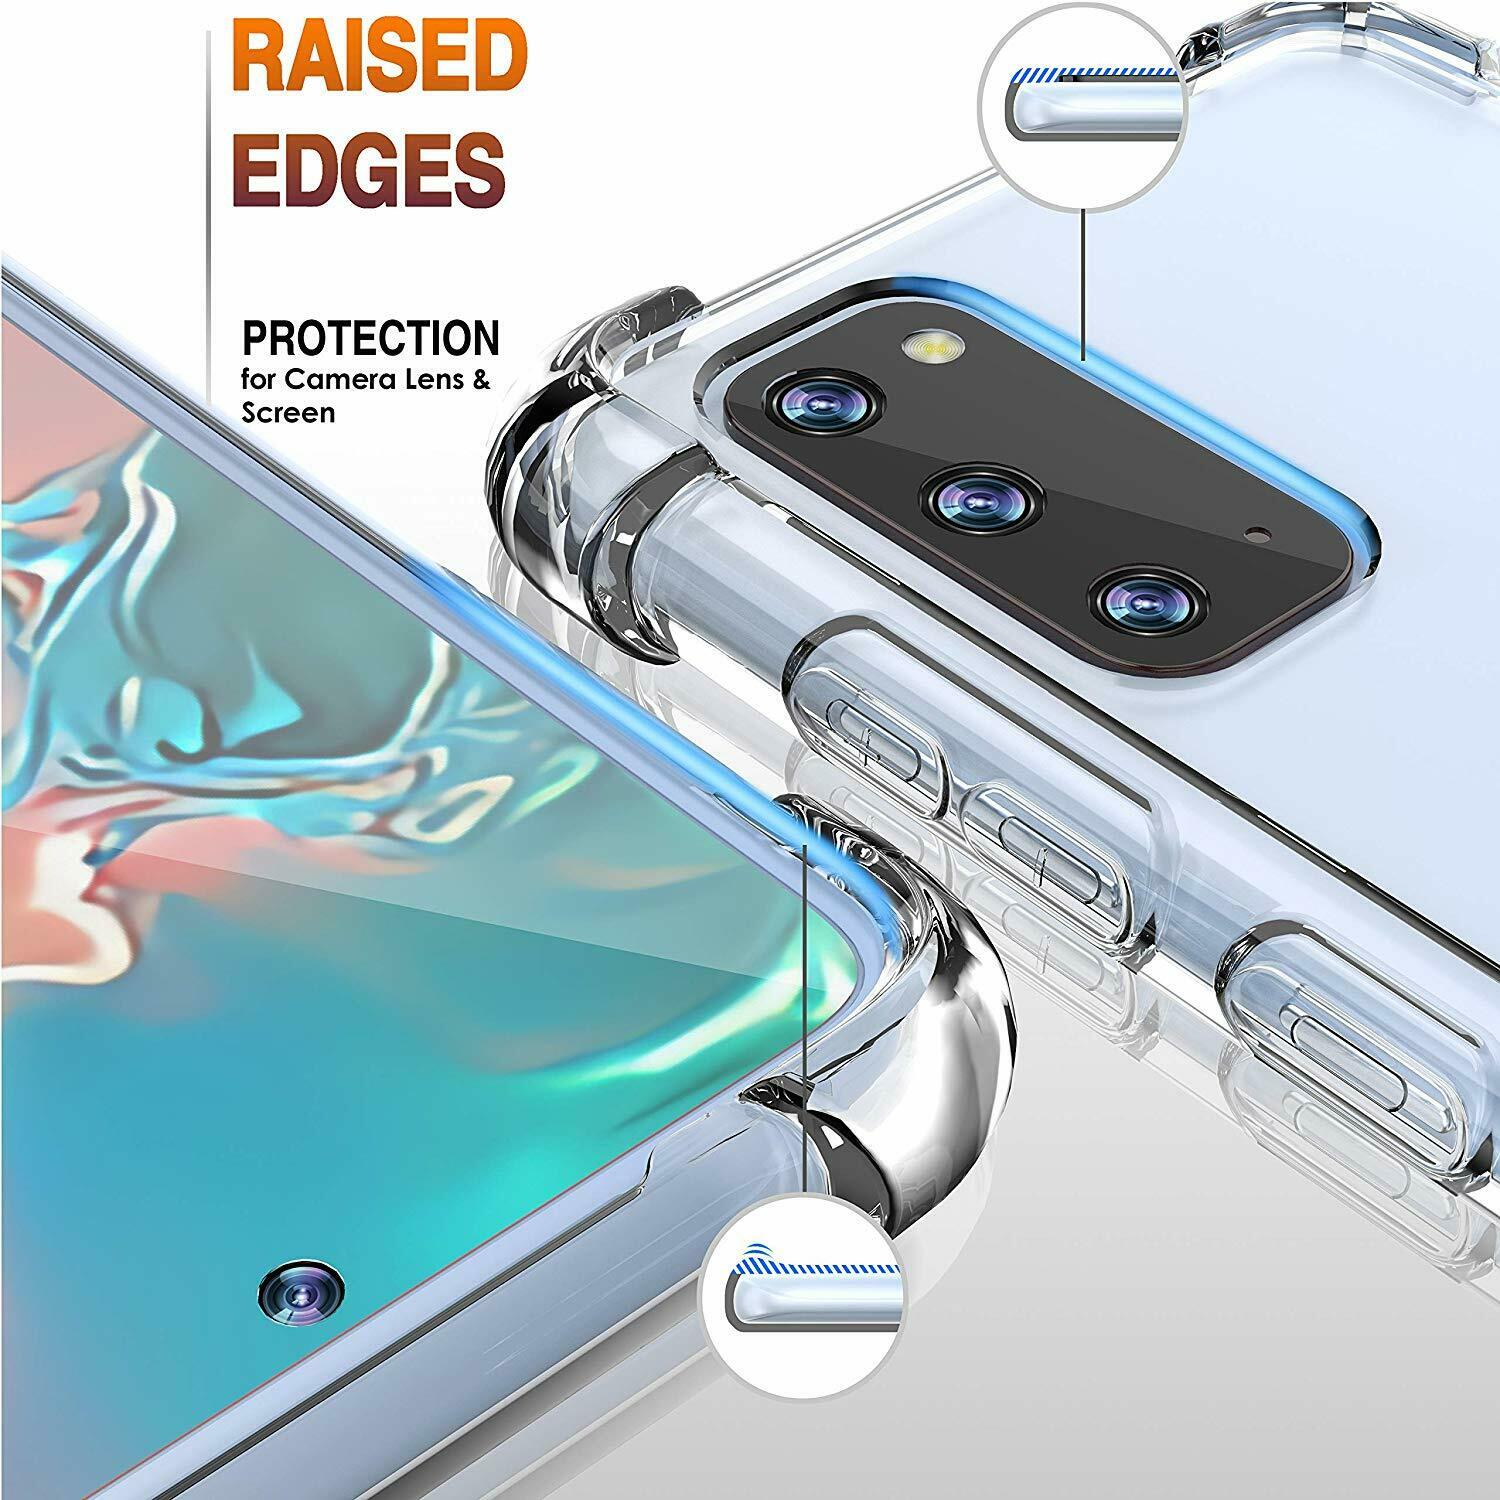 5G Ultra Thin Clear Shockproof Cover Case